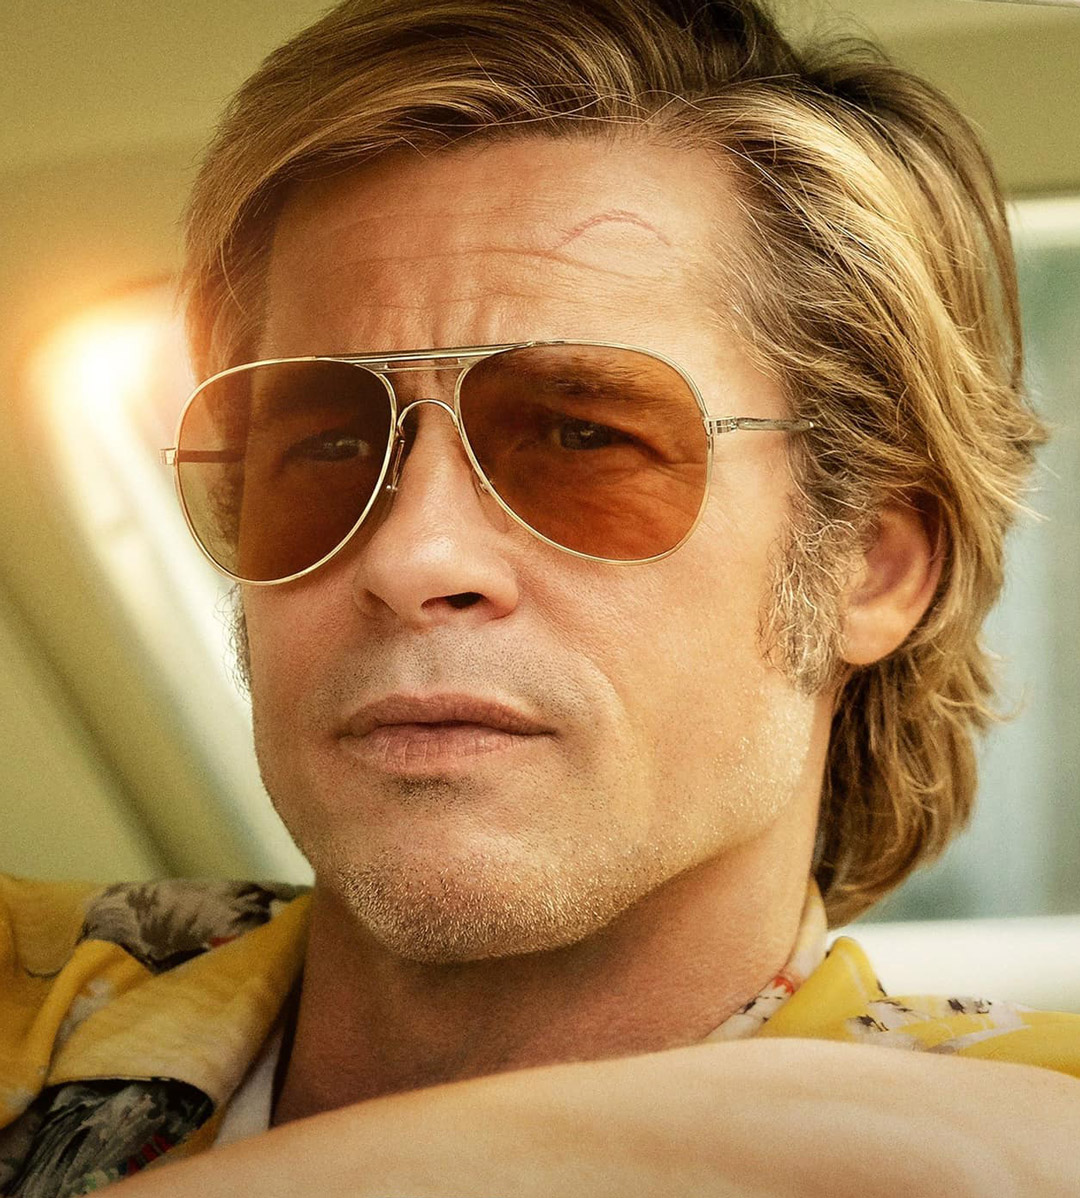 Vintage Gold sunglasses - Brad Pitt - Once Upon A Time In Hollywood |  Sunglasses ID - celebrity sunglasses